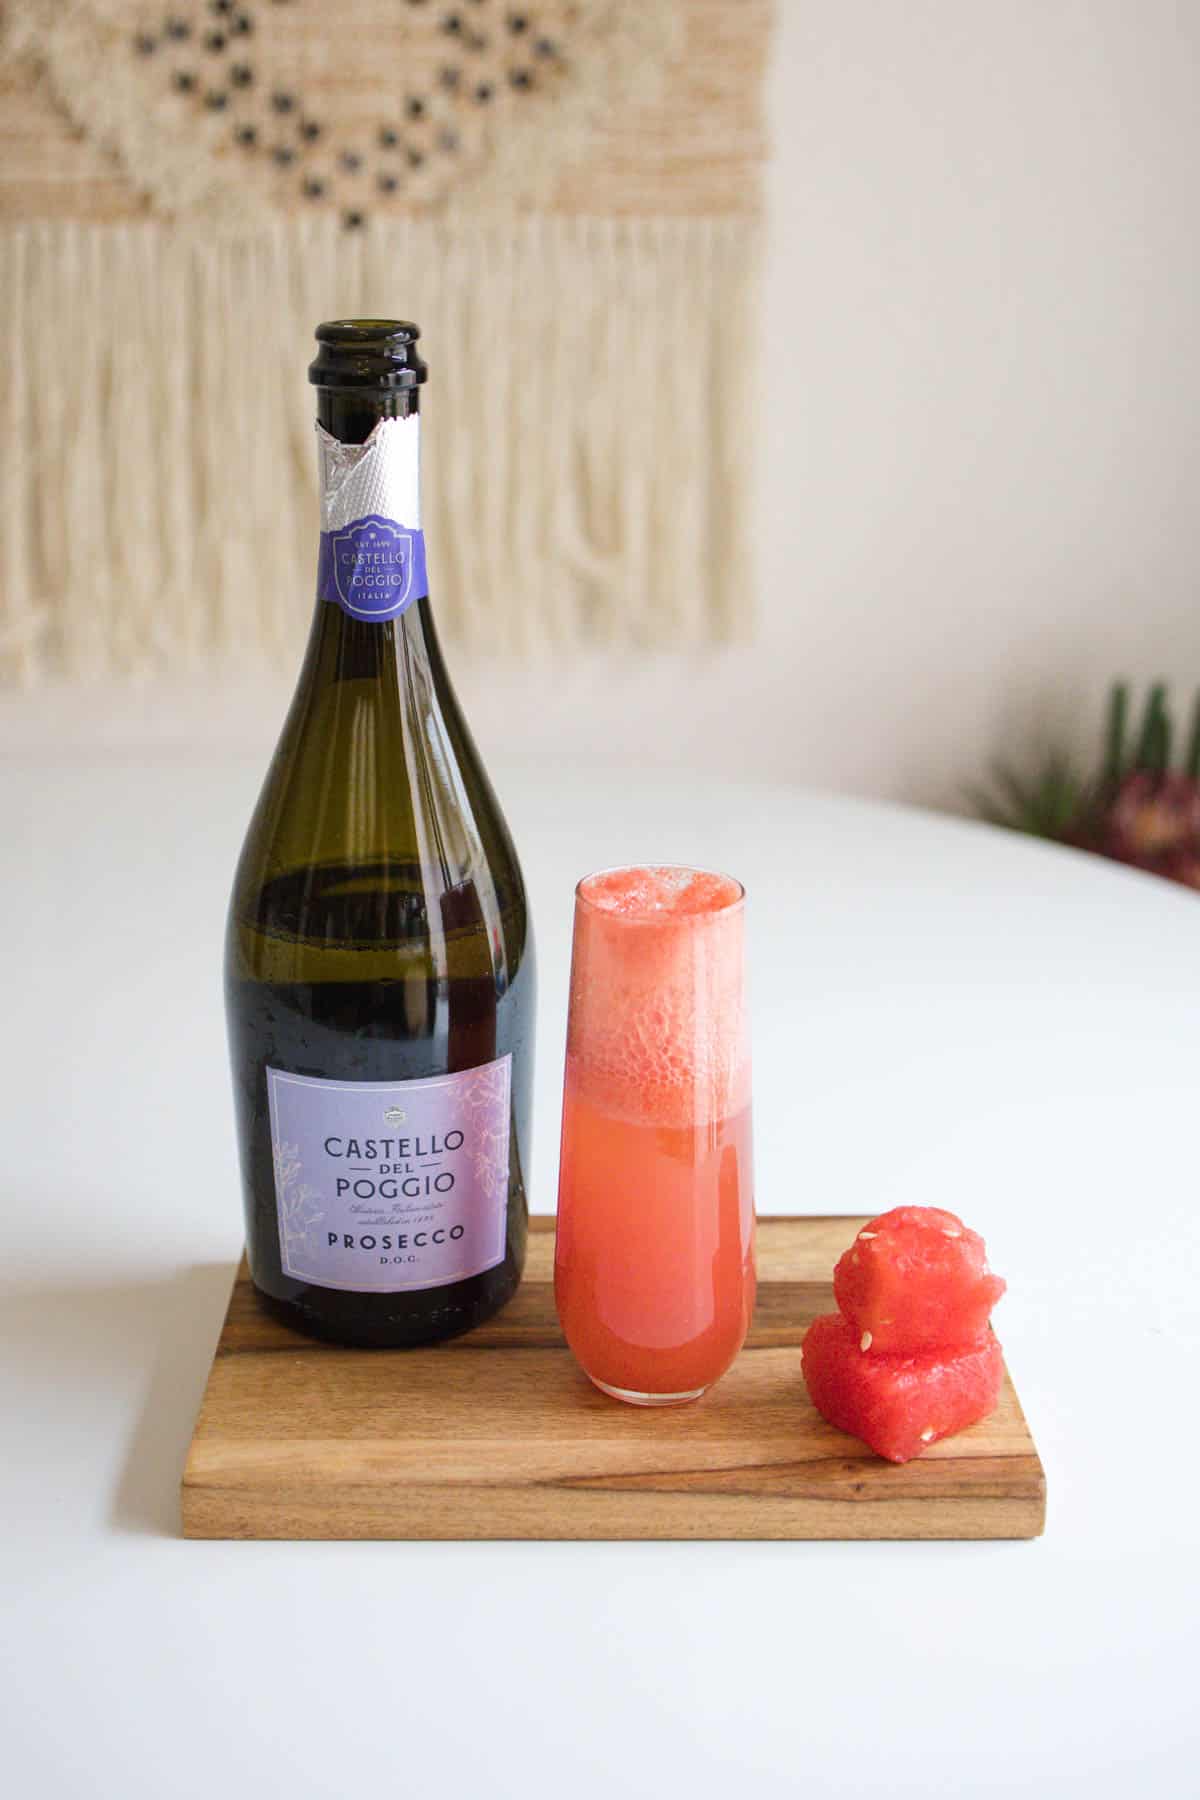 The Best Champagne for Mimosas - Champagne Bottles to Make Mimosas With